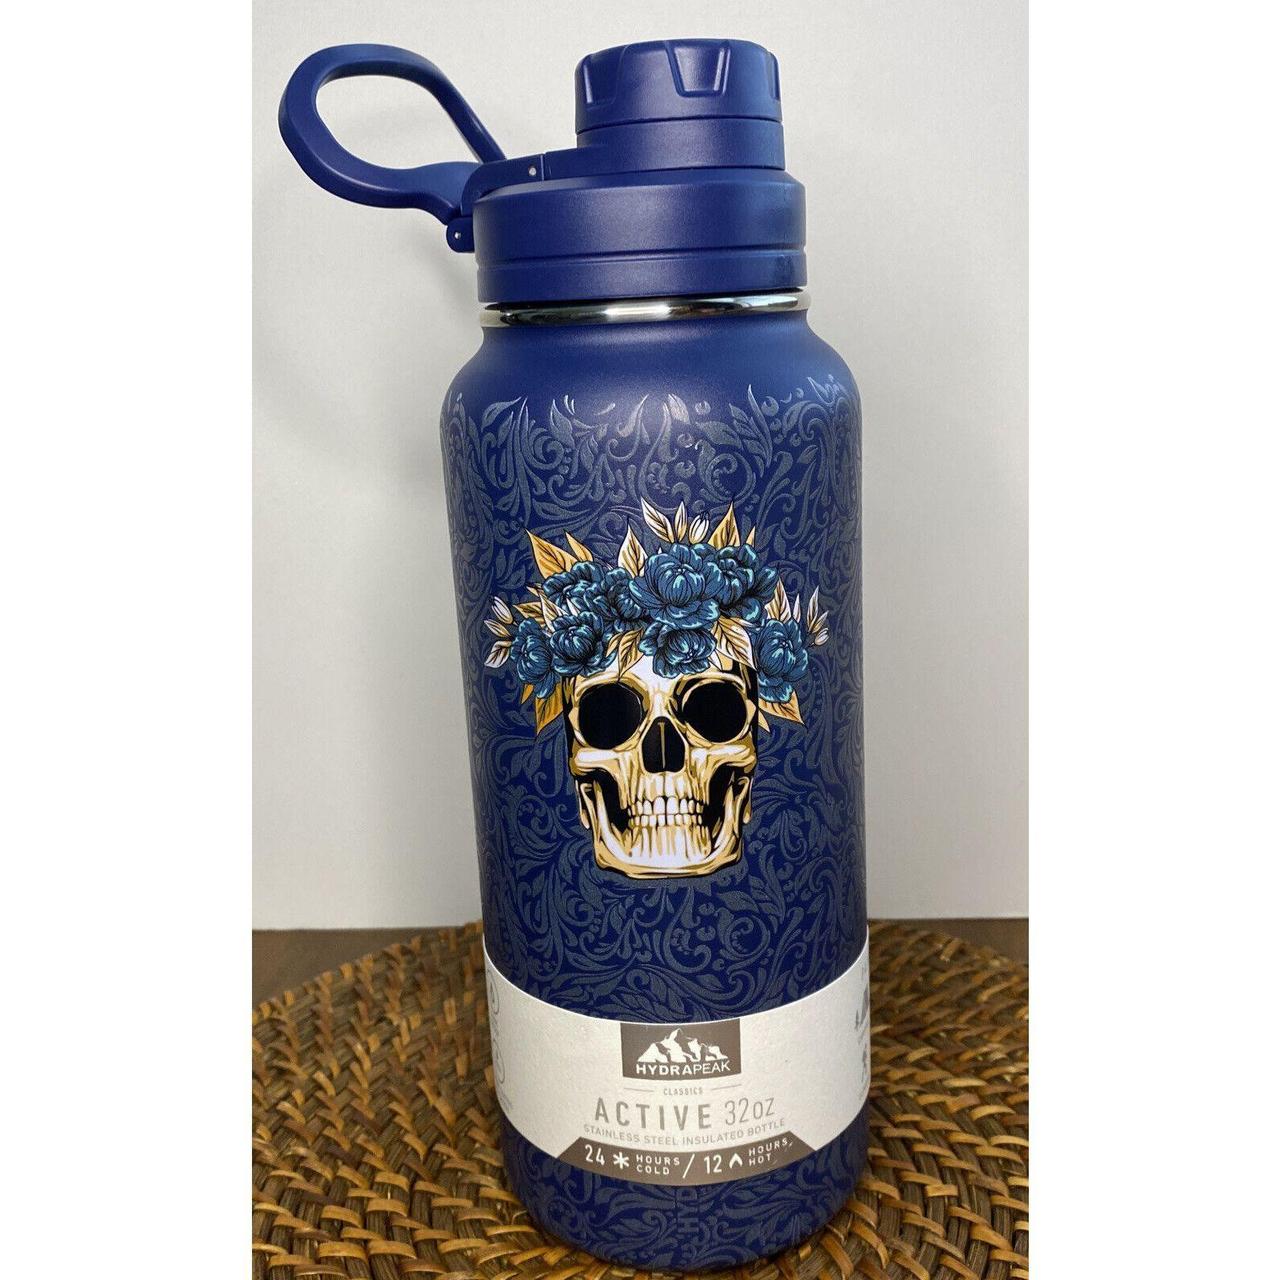 Review Hydrapeak 32 oz Insulated Water Bottle with Chug Lid 